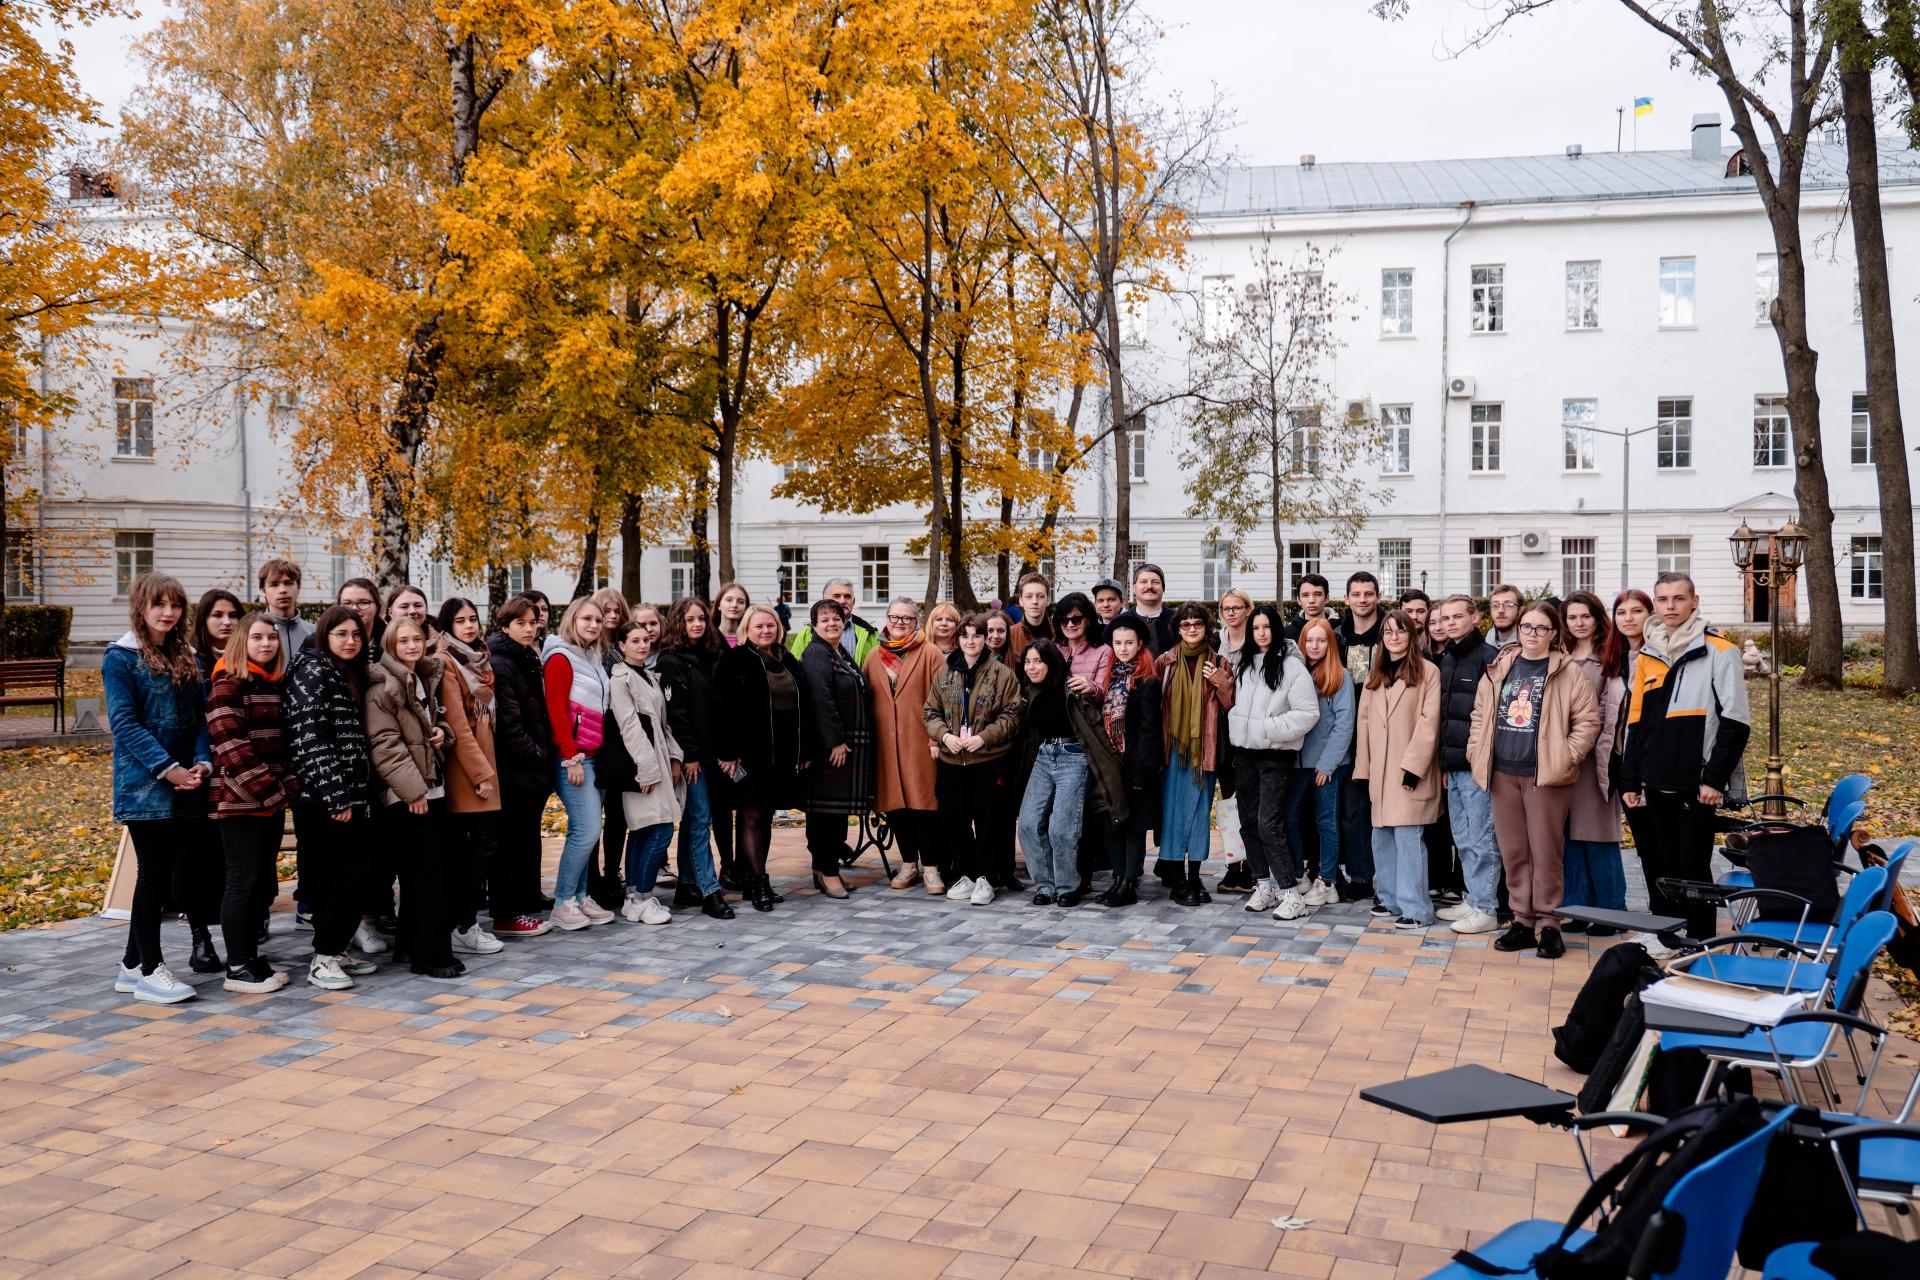 Student artists compete in quick drawing techniques at the All-Ukrainian Plein Air “Autumn Sketching”